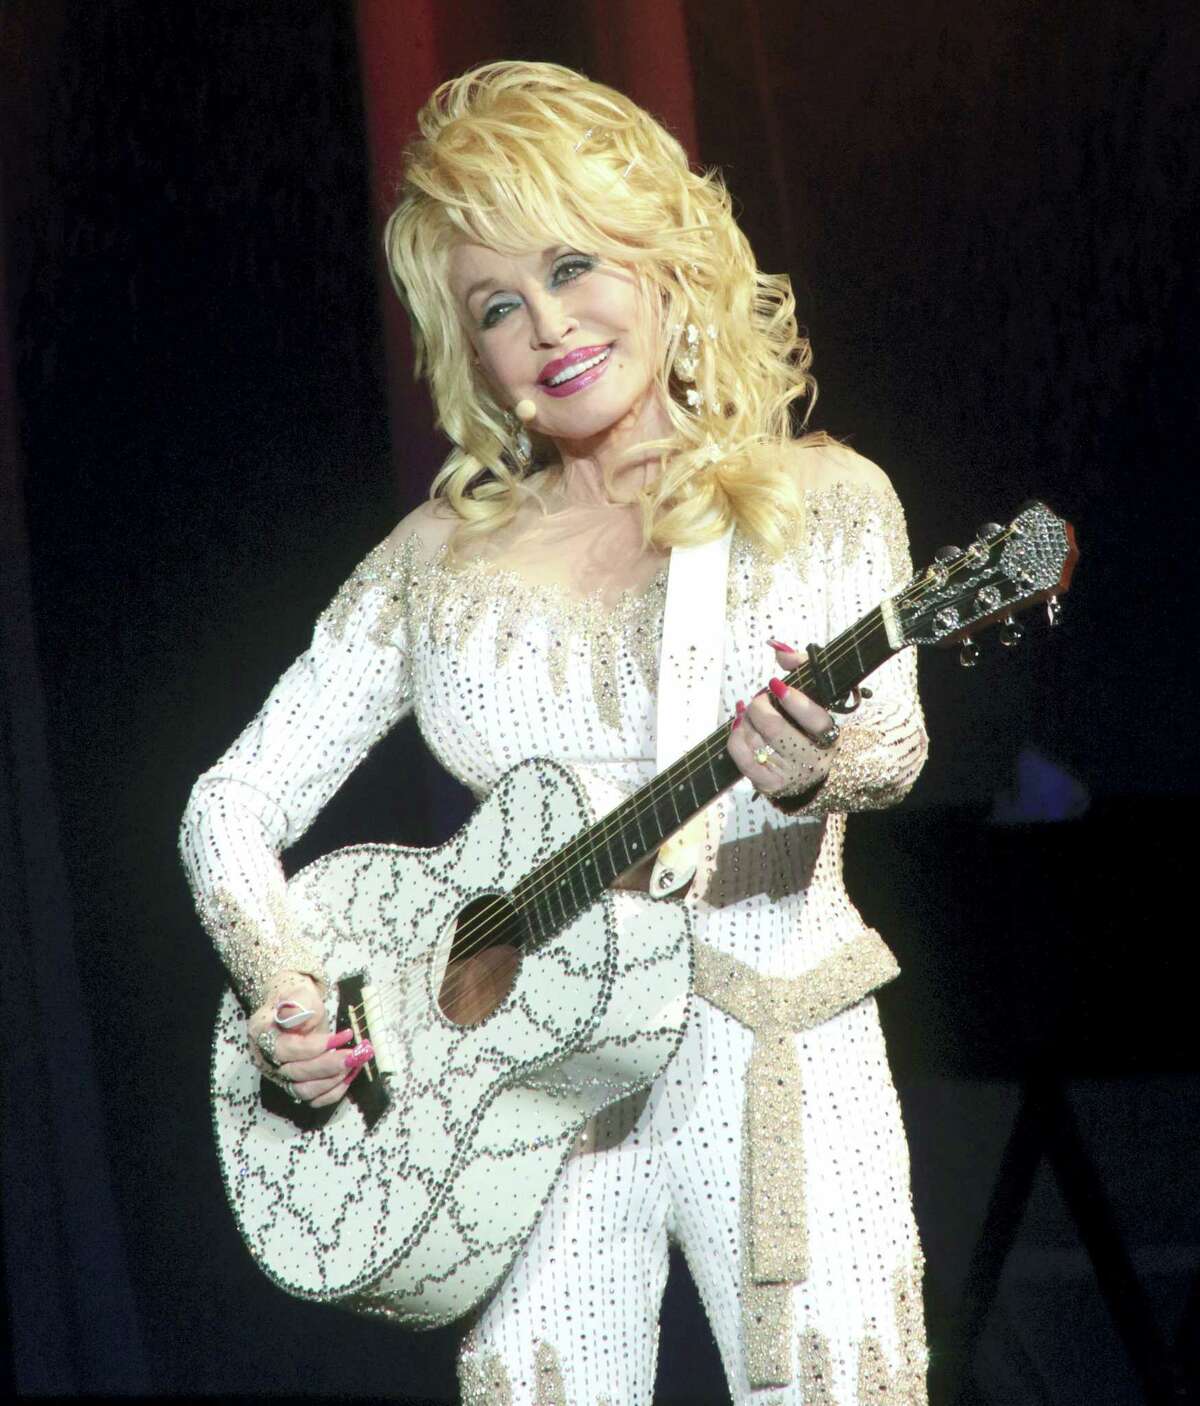 In this June 15, 2016, file photo, Dolly Parton performs in concert during her Pure & Simple Tour in Philadelphia. Parton will receive the Willie Nelson Lifetime Achievement Award at the 50th annual Country Music Association Awards in Nashville, Tenn., on Nov. 2.